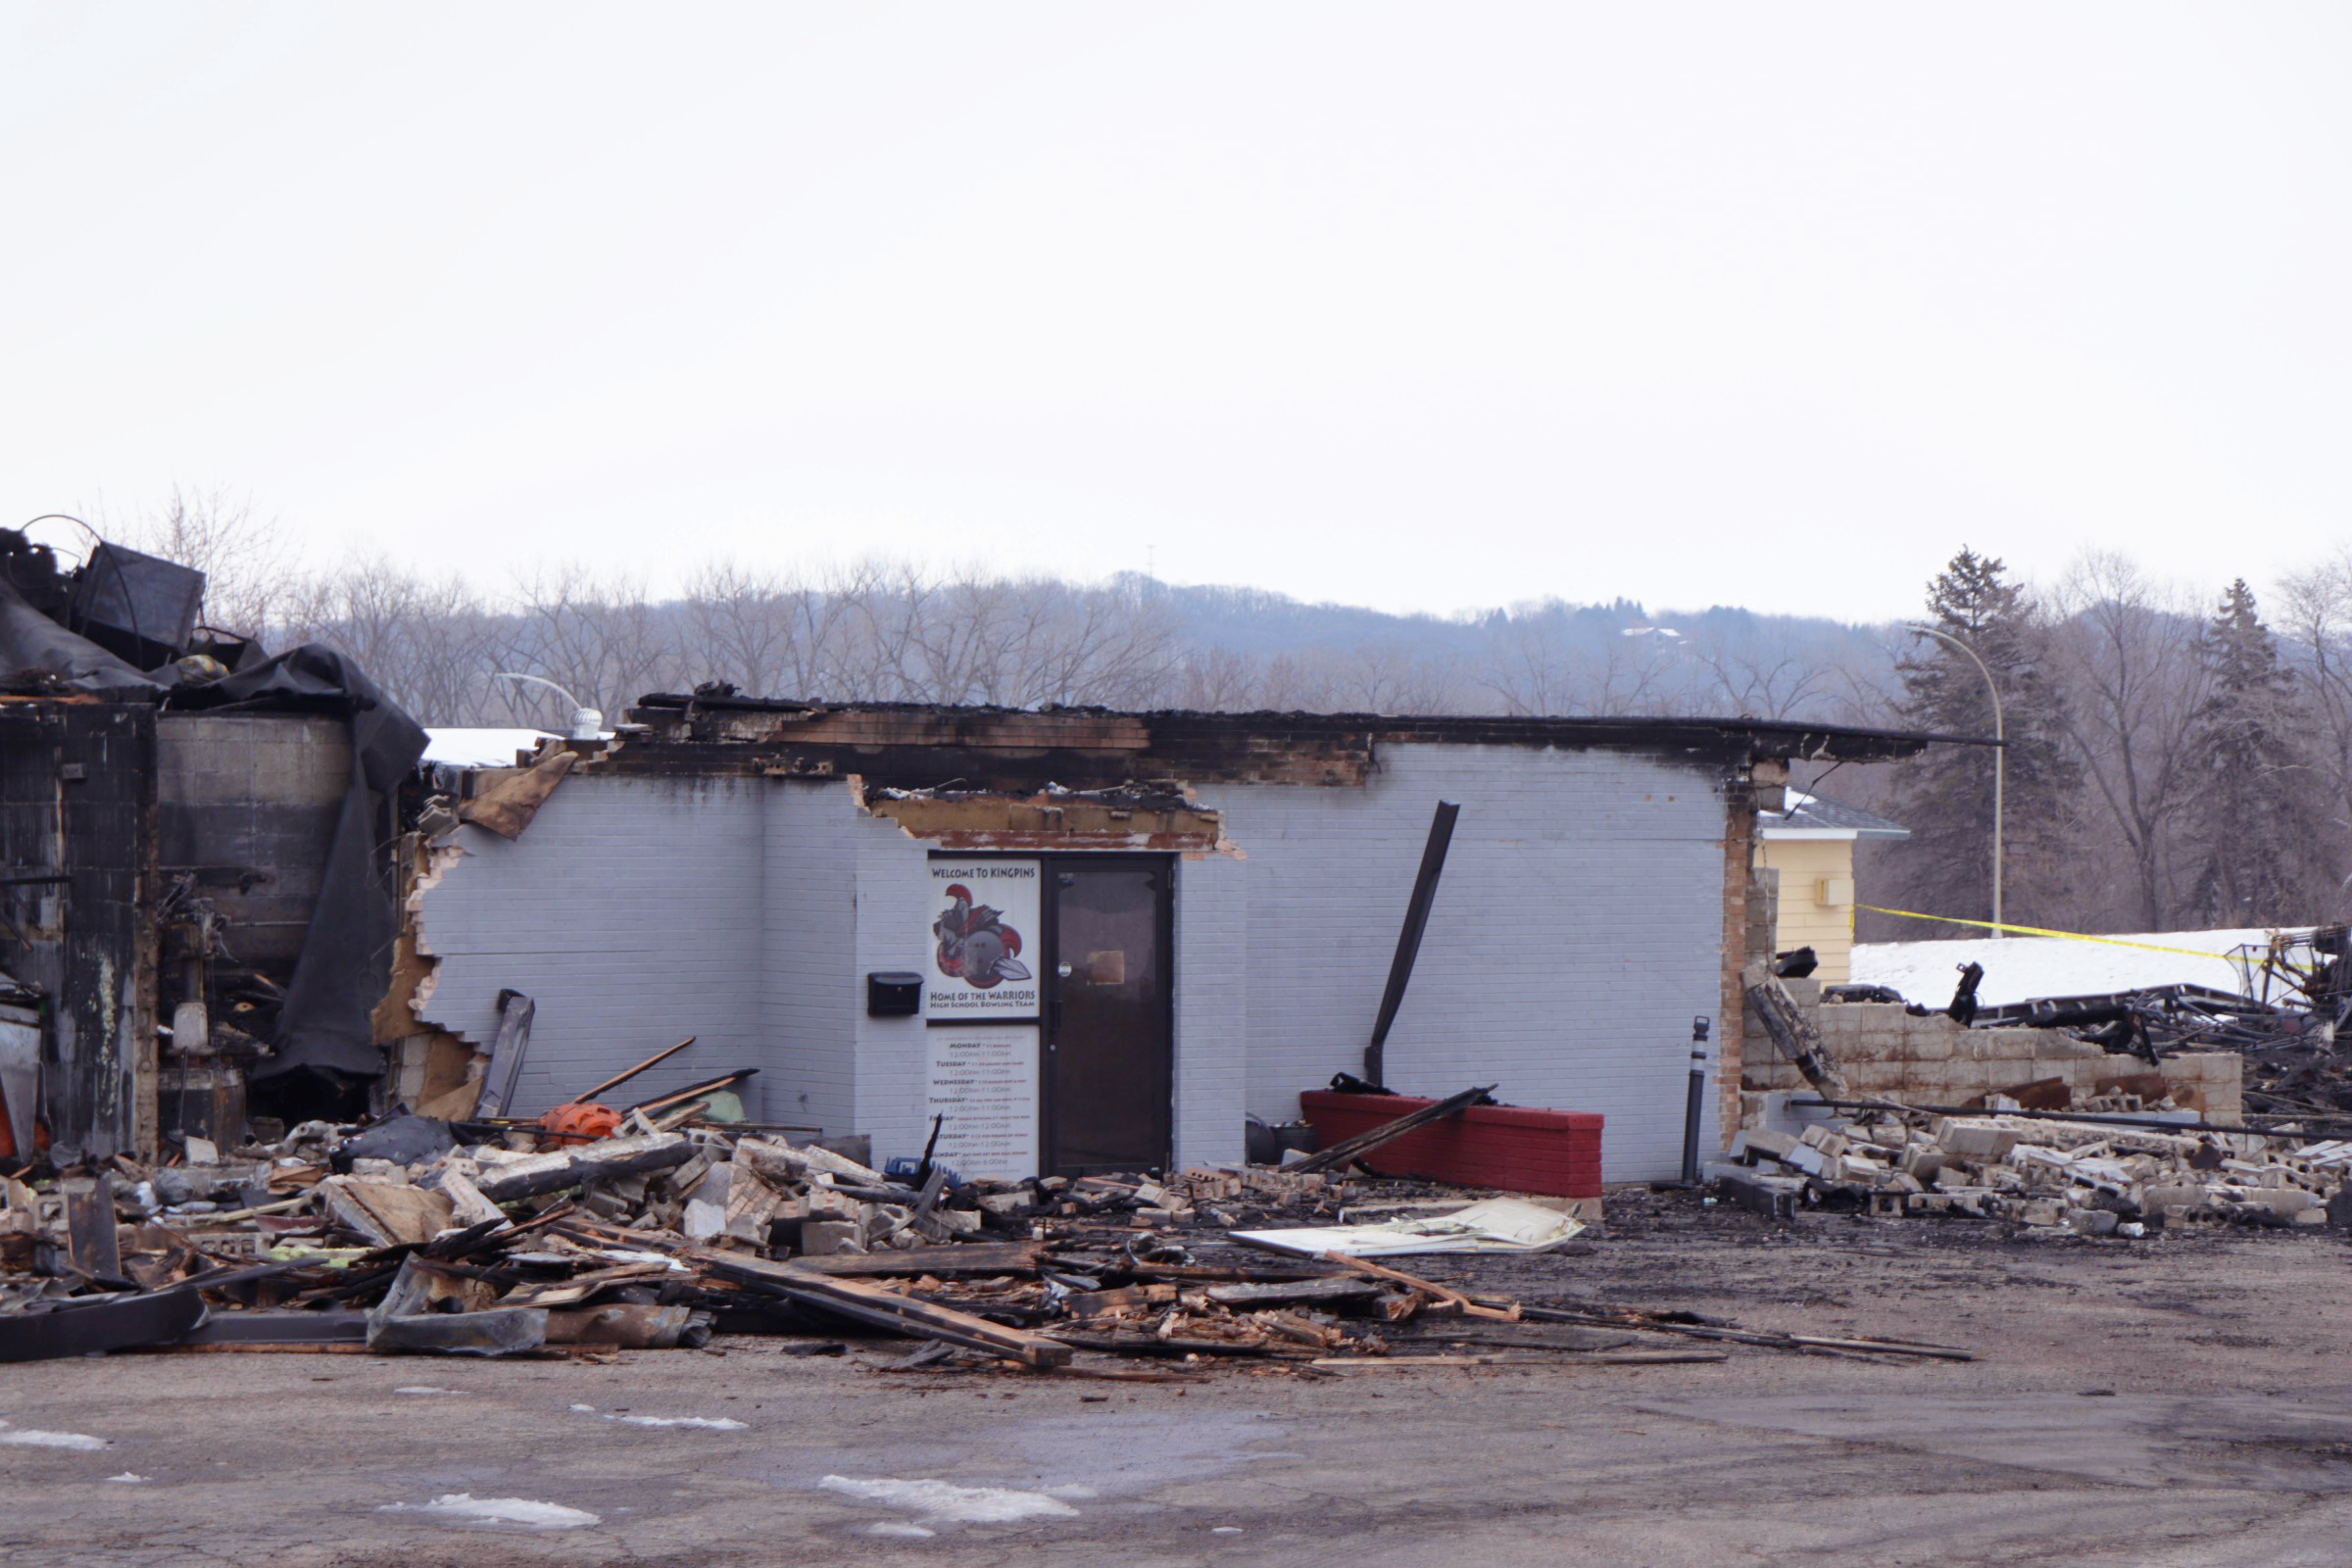 KingPins bowling alley, once local popular hangout spot, destroyed after a structure fire on Sunday morning February 16.